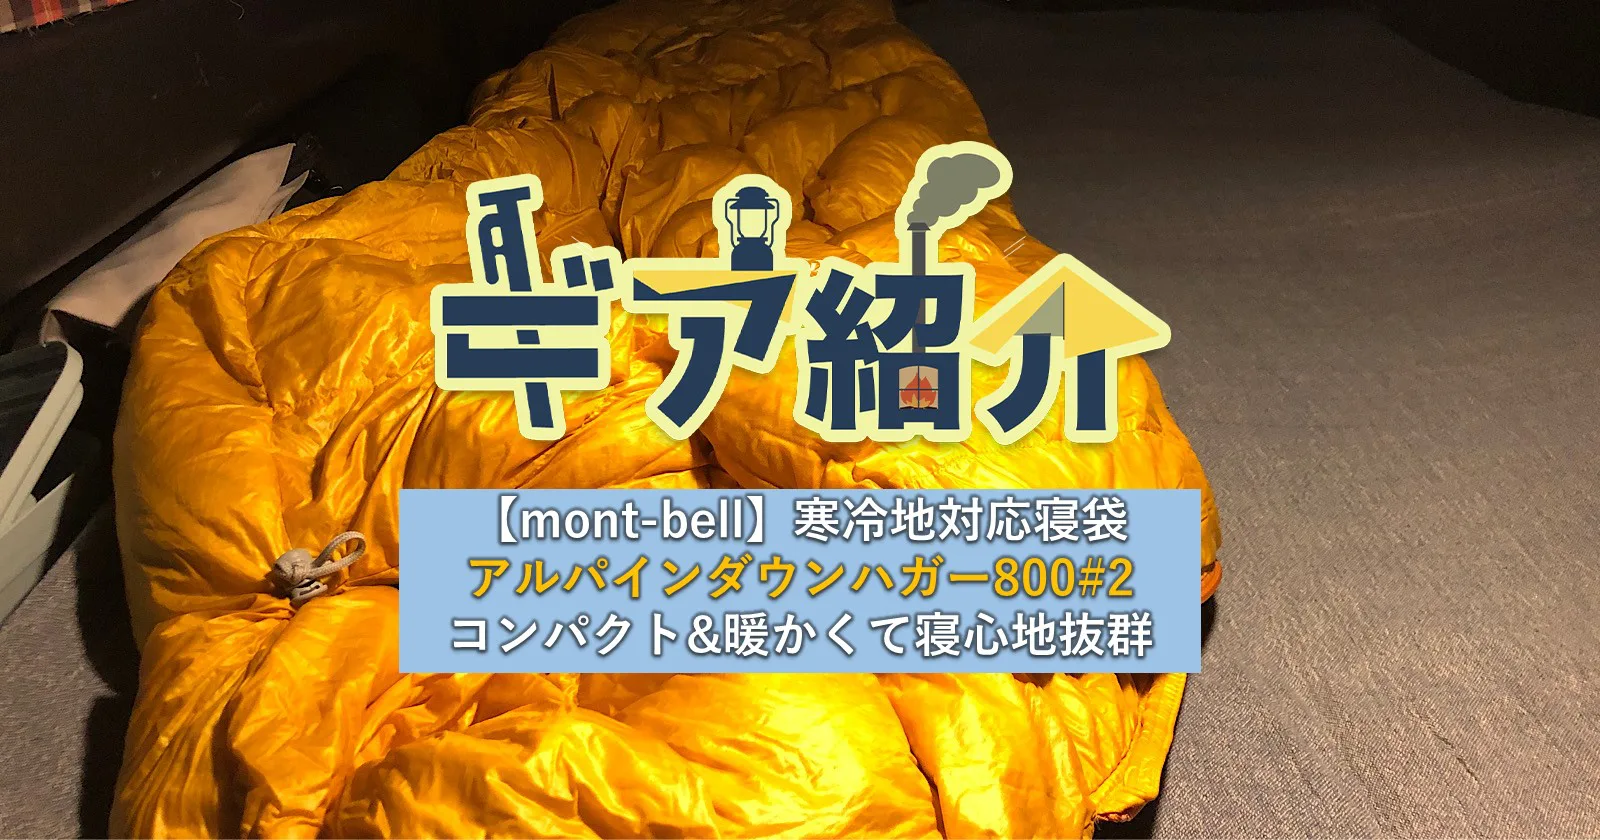 mont-bell】寒冷地対応寝袋アルパインダウンハガー800#2は コンパクト 